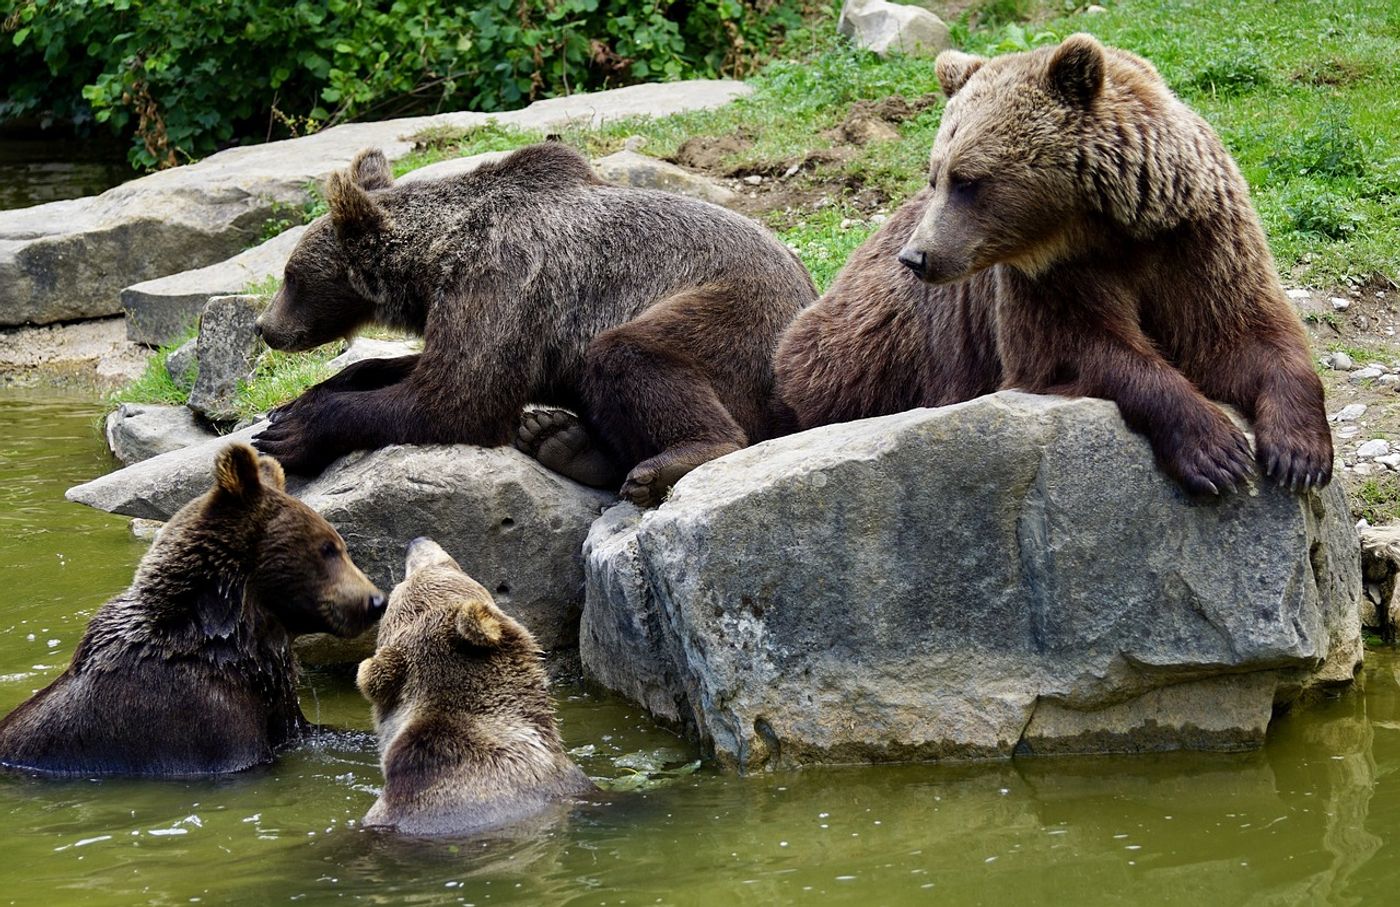 Brown bear cubs in Sweden's forests are spending more time with their mothers than ever before.